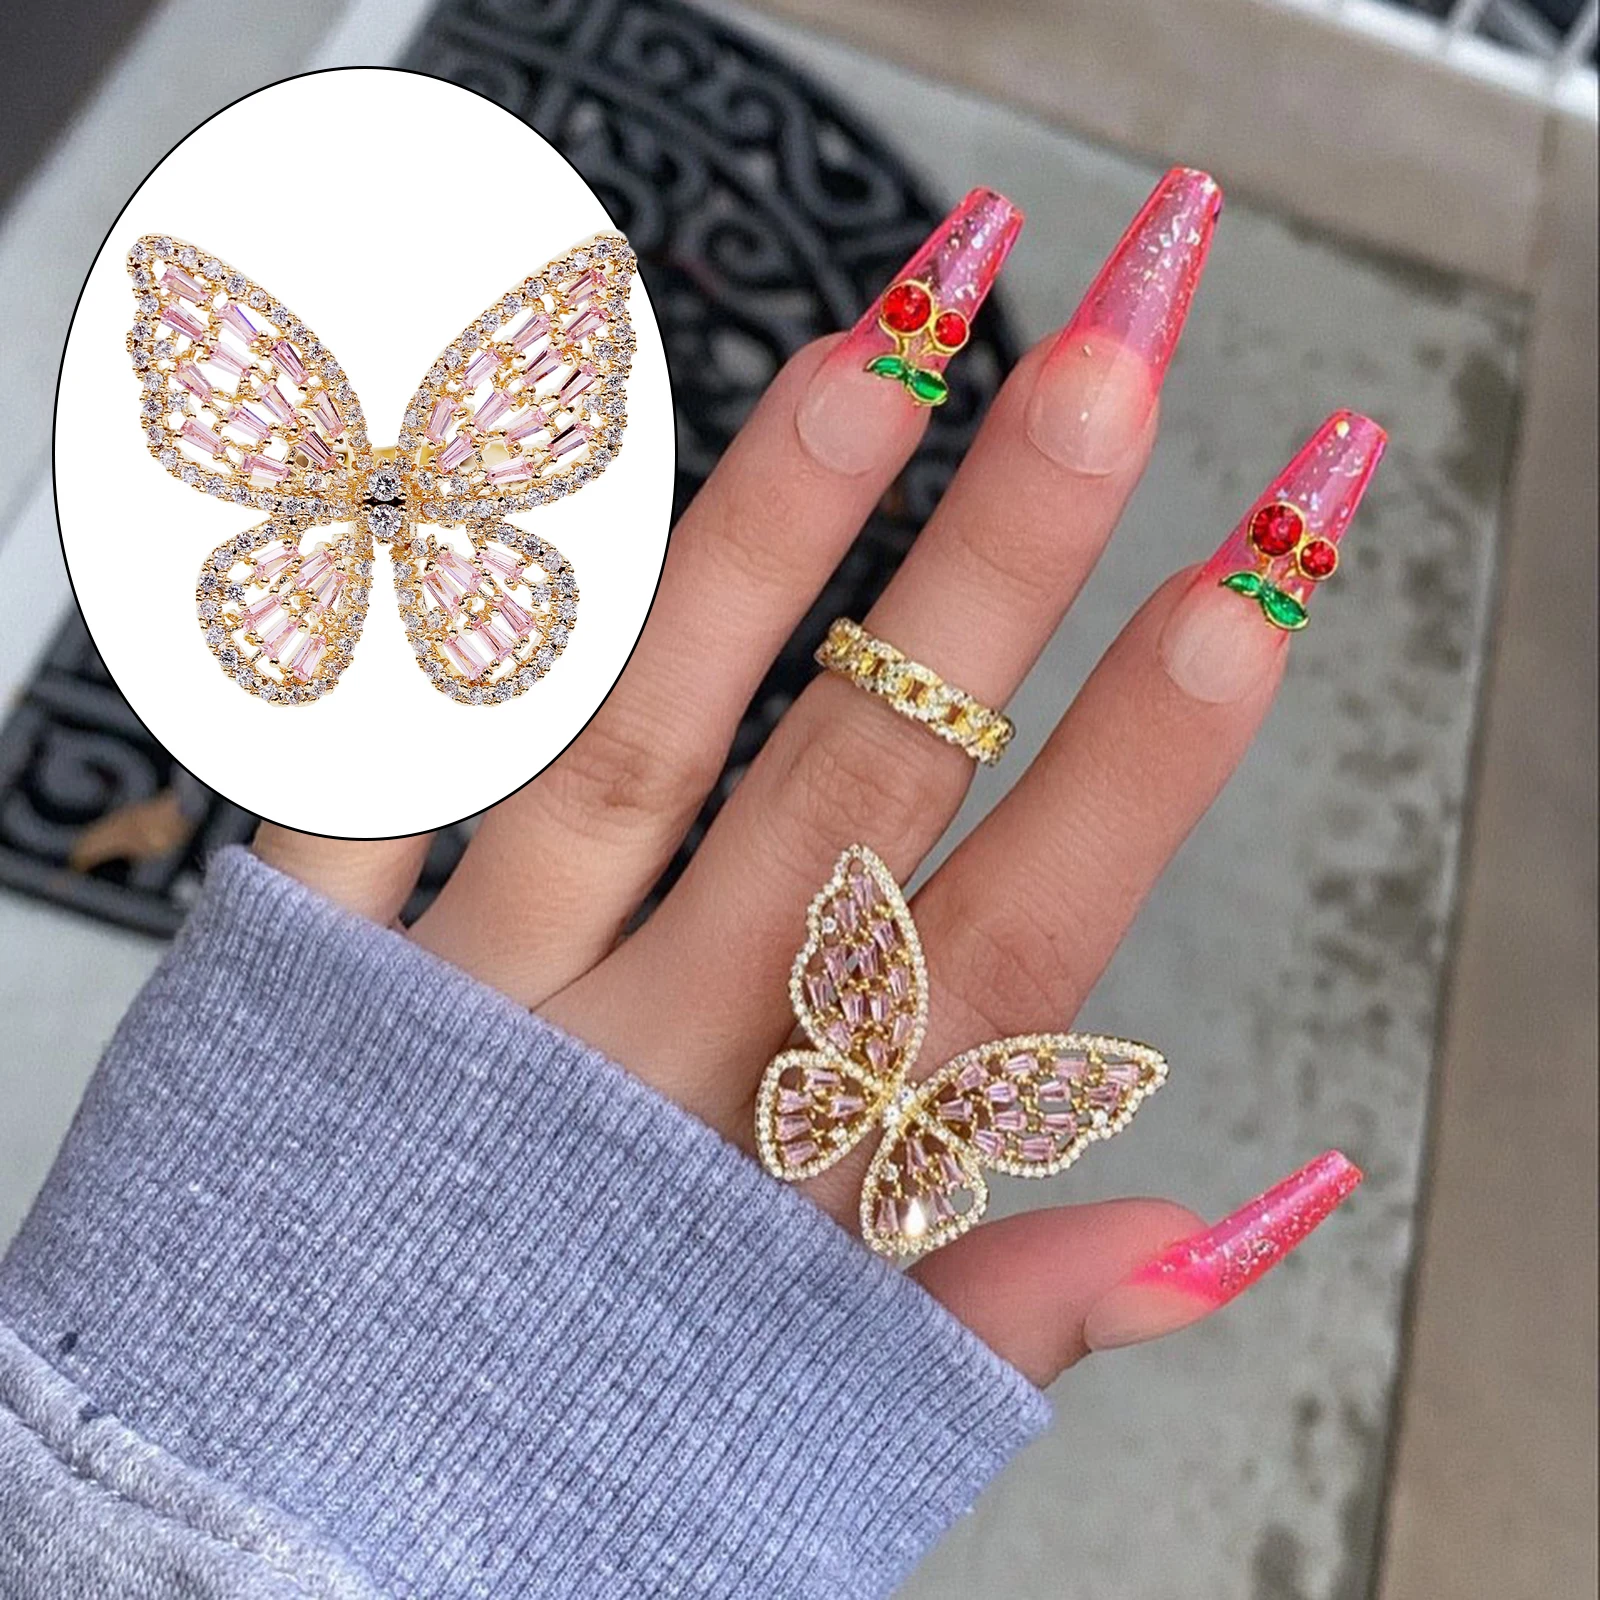 Crystal Butterfly Rings for Women Metal Fashion Colorful Vintage Animal Charms Rings Jewelry